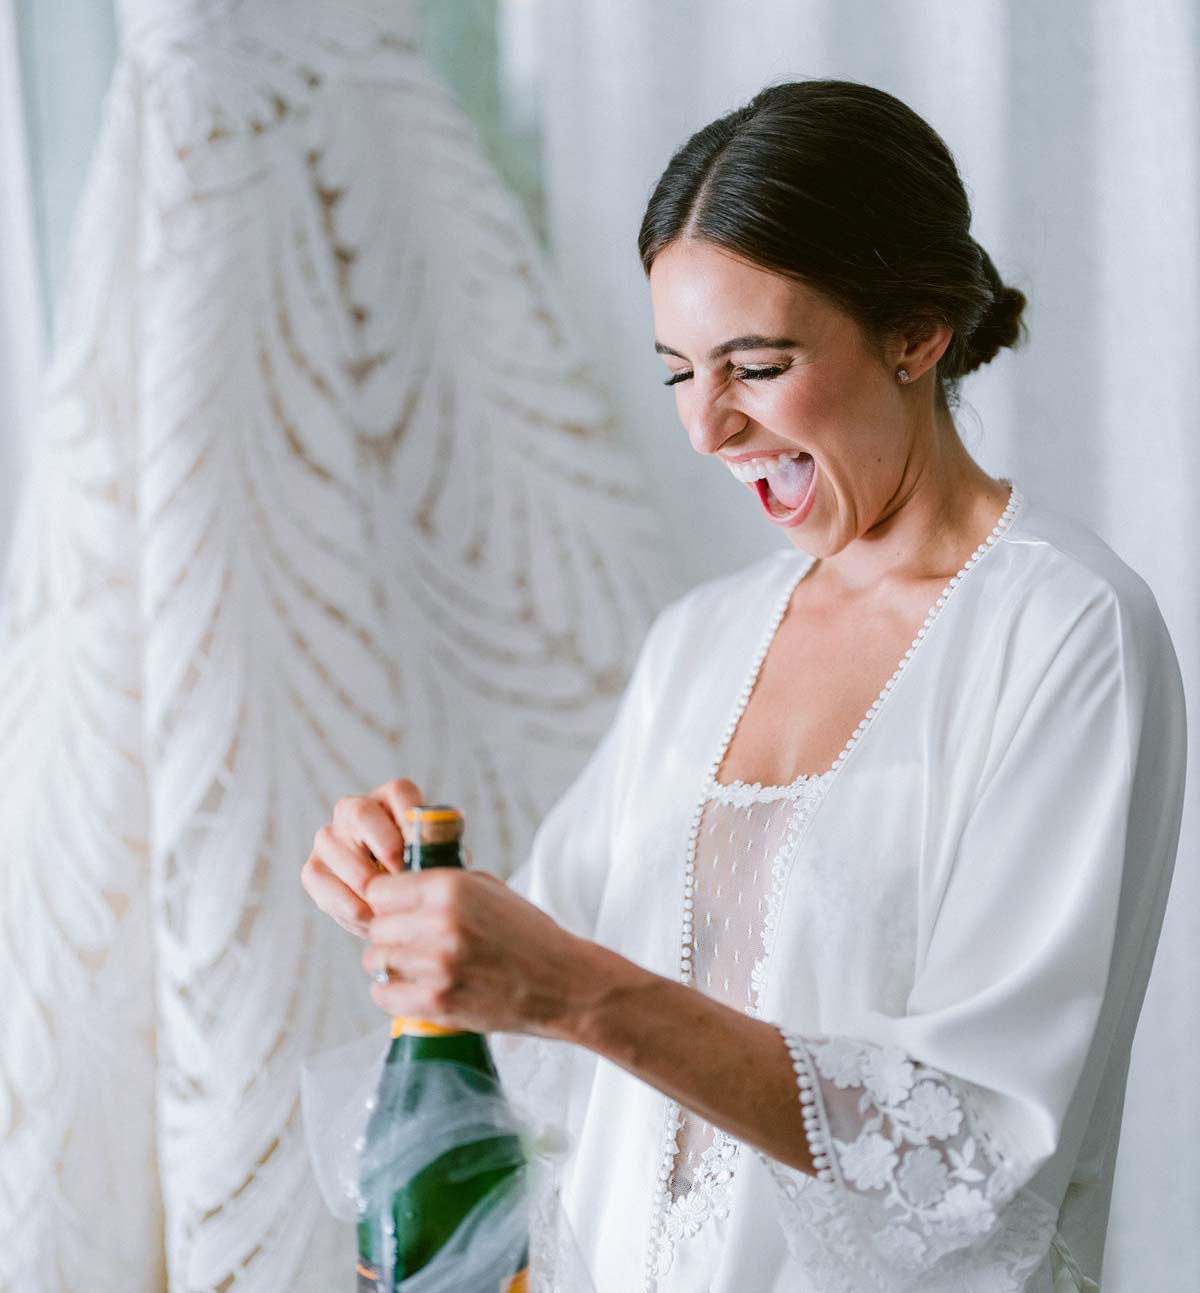 5 Must-Have Splurges for Your Wedding Day